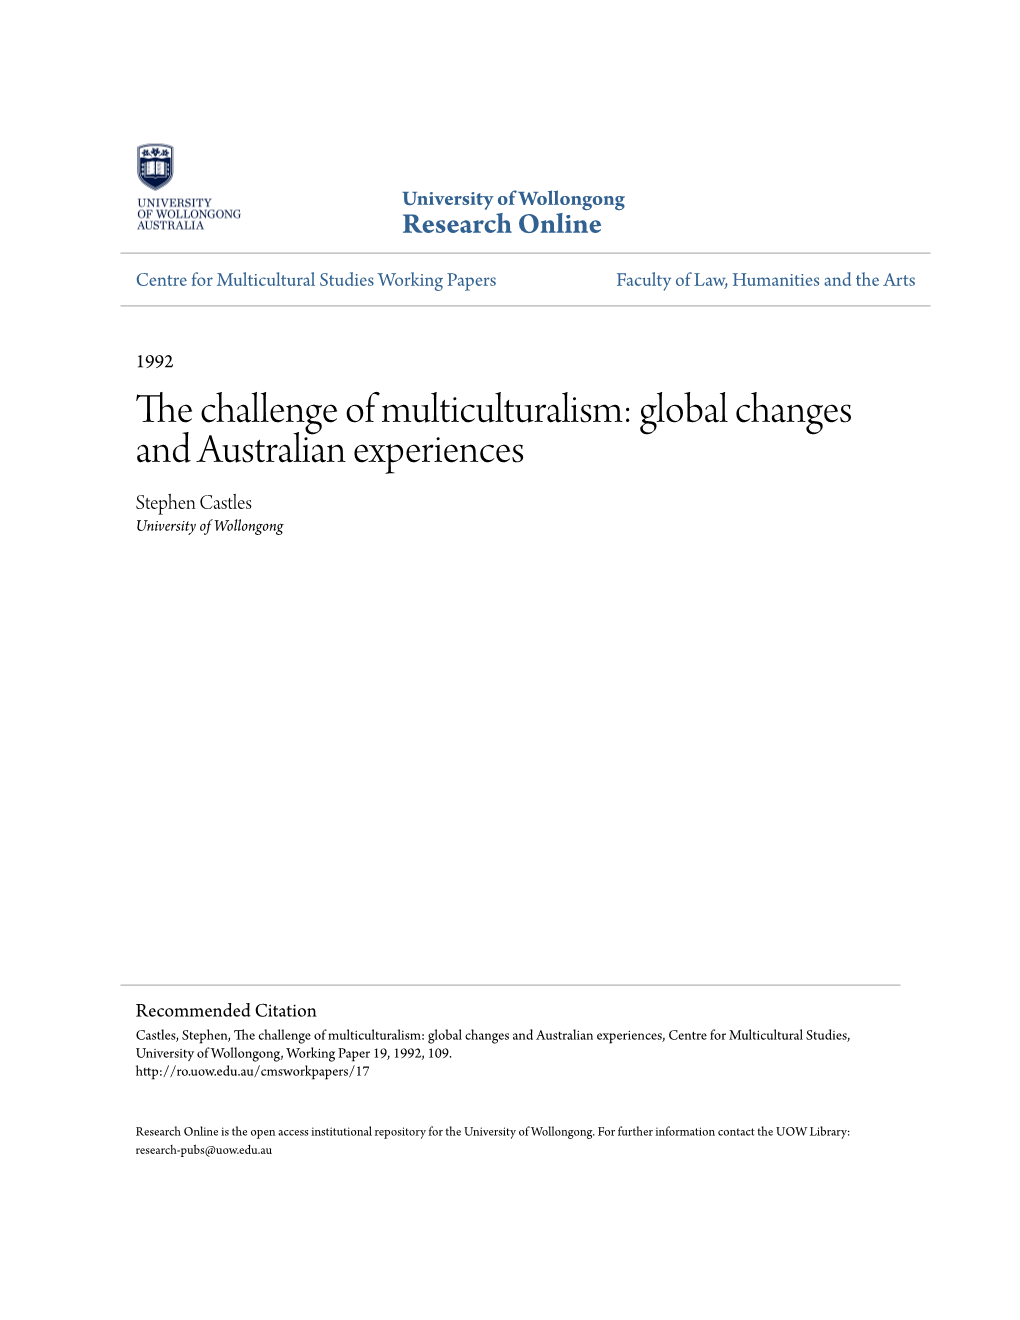 The Challenge of Multiculturalism: Global Changes and Australian Experiences Stephen Castles University of Wollongong